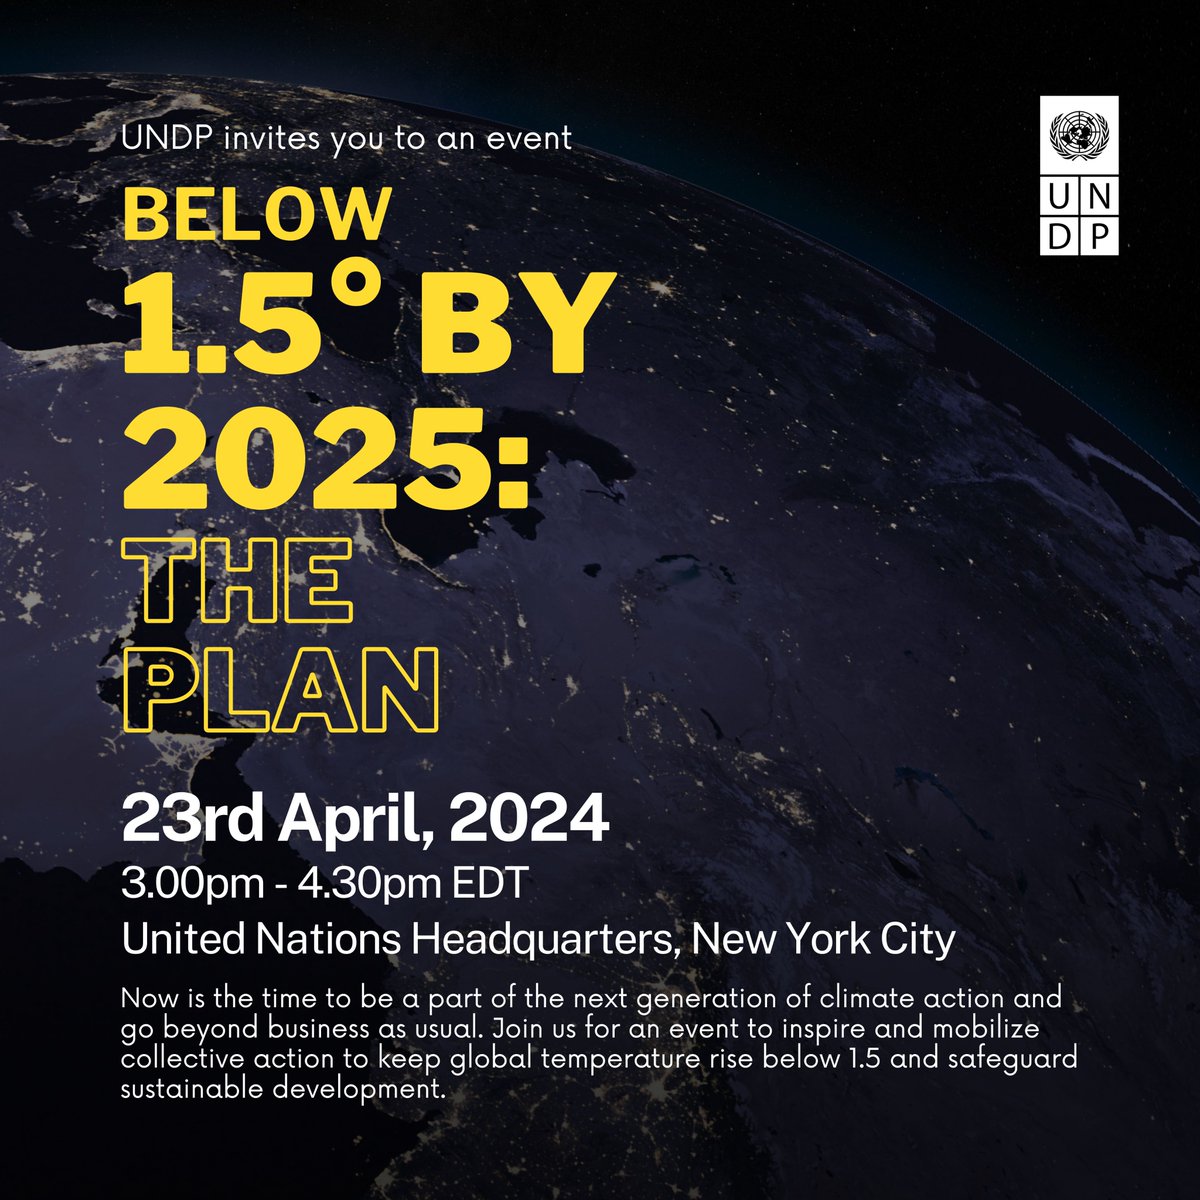 More than ever, we need collective action & multilateralism to limit temperature🌡️ rise to 1.5°C. Join @AntonioGuterres, @ASteiner, @Cassie_Flynn & @MarcosAthias to find out how @UNDP is scaling up climate action through its #ClimatePromise 2025. 📺 bit.ly/3UnSrFT